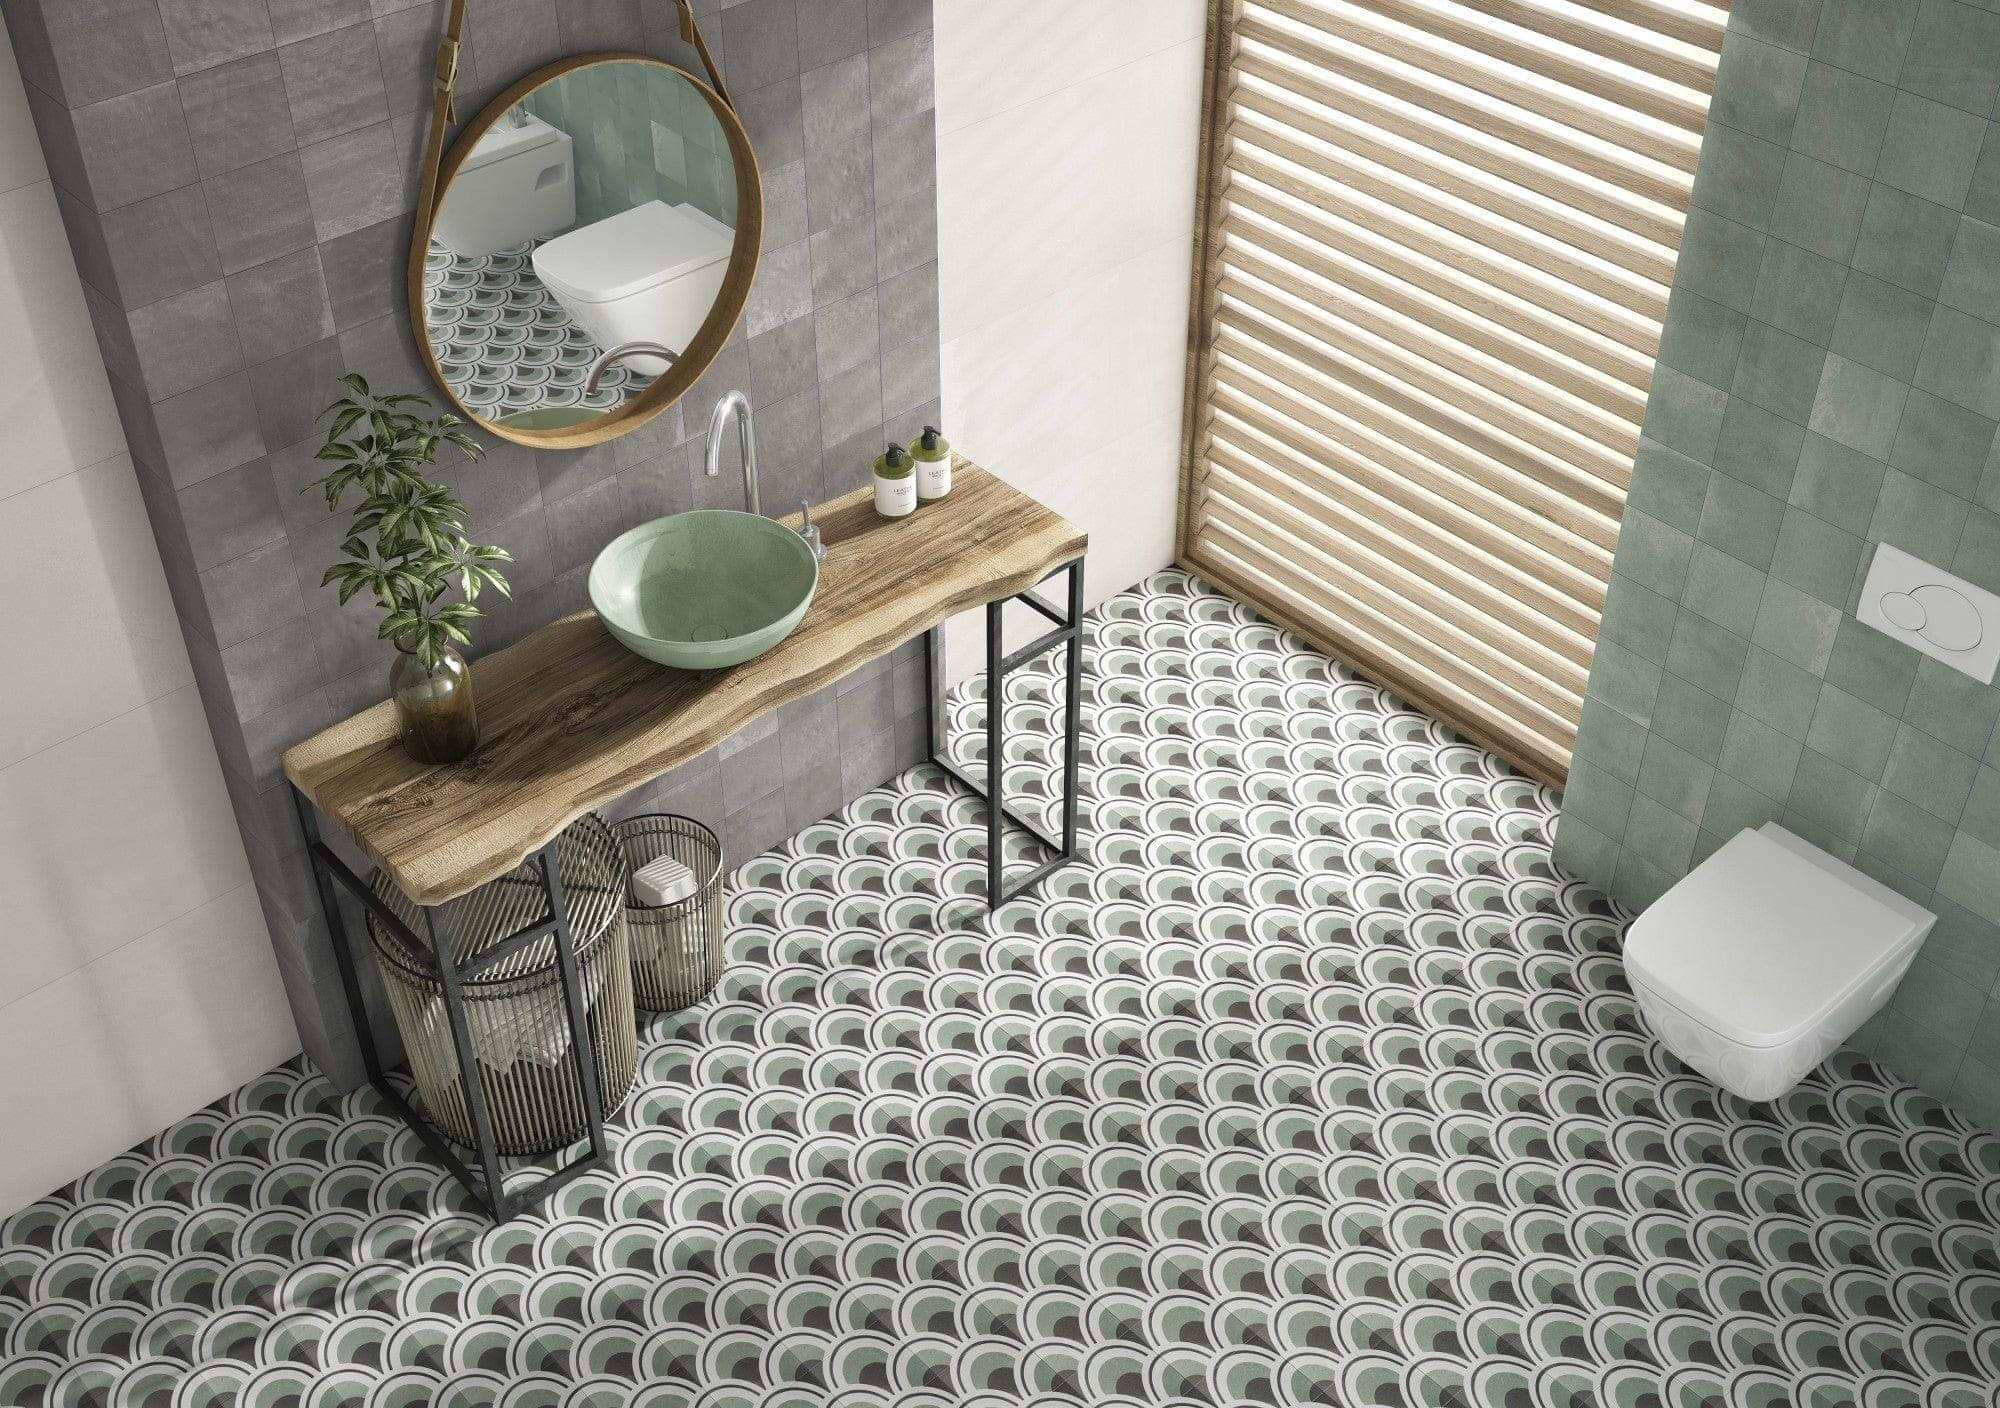 Hyperion Tiles All Products 40 x 40 x 15cm Lavabo Berlin Grey